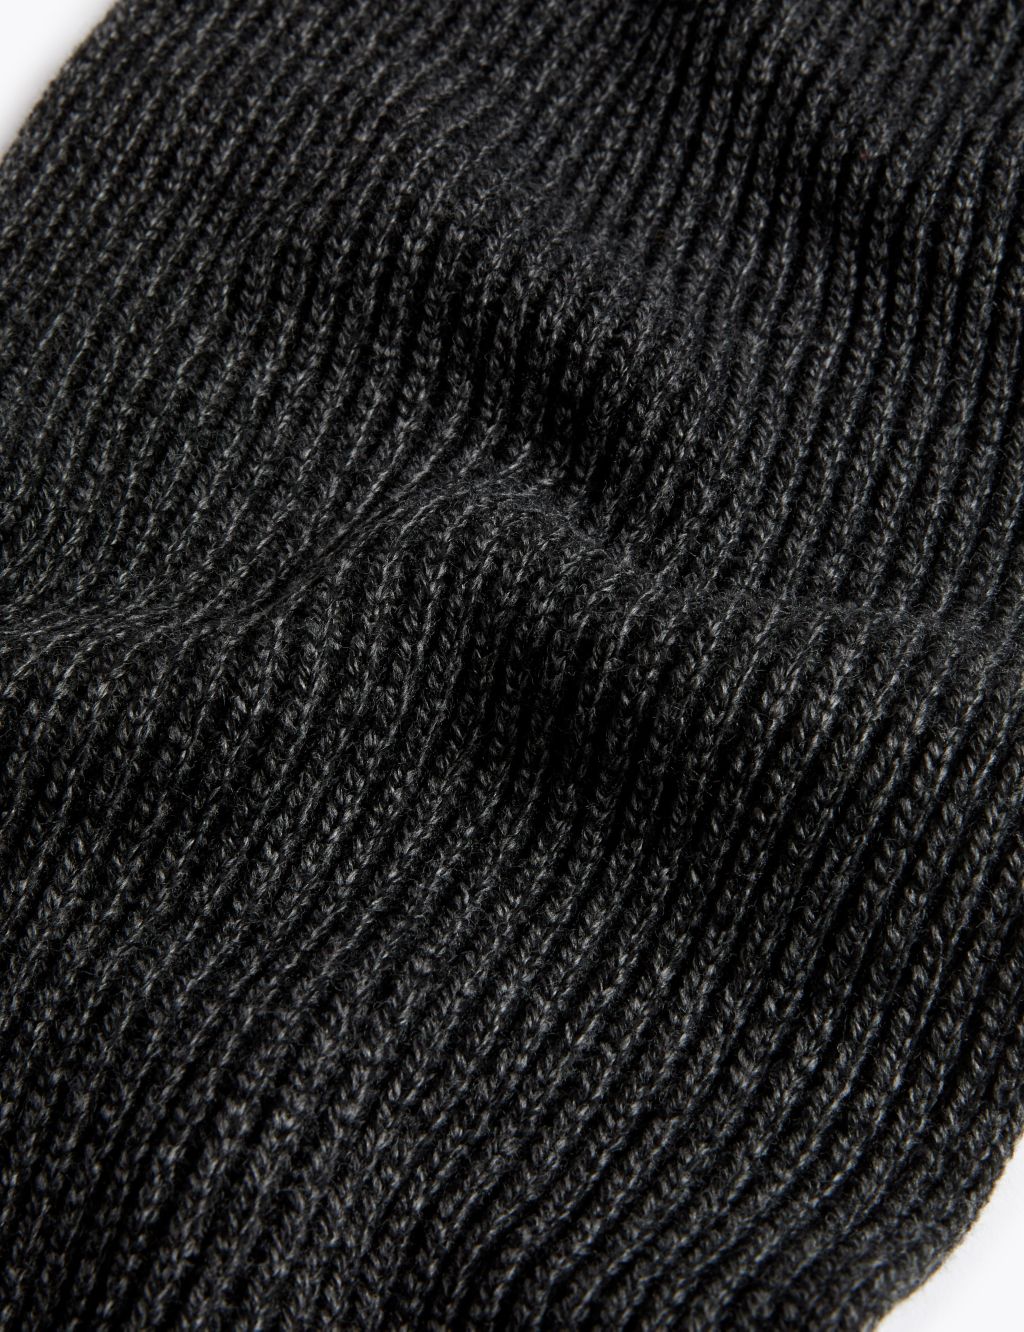 Knitted Textured Scarf image 1